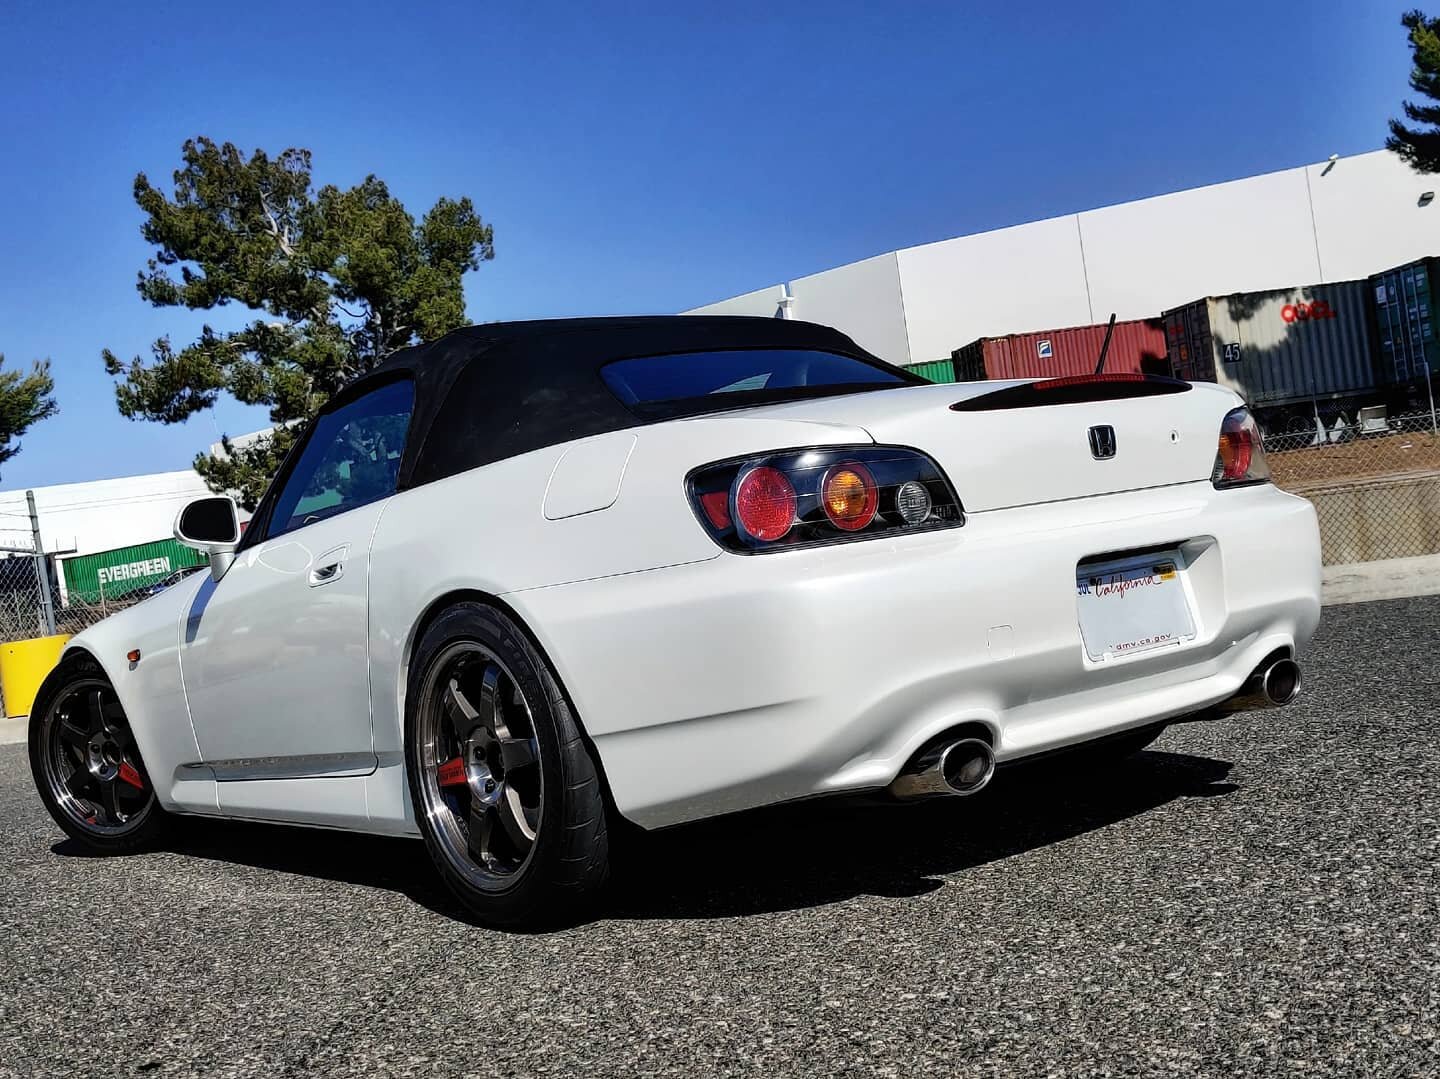 @honda S2000 Full Color Change
More upgrades coming in soon. 

Color: Gloss Pearl White 🔹🔹🔹🔹🔹🔹🔹🔹🔹🔹🔹🔹🔹🔹🔹🔹🔹🔹🔹🔹
#cars #carlifestyle #carlife #instacars #carsofinstagram #carswithoutlimits #carstagram #carporn #honda #hondas2000 #s200